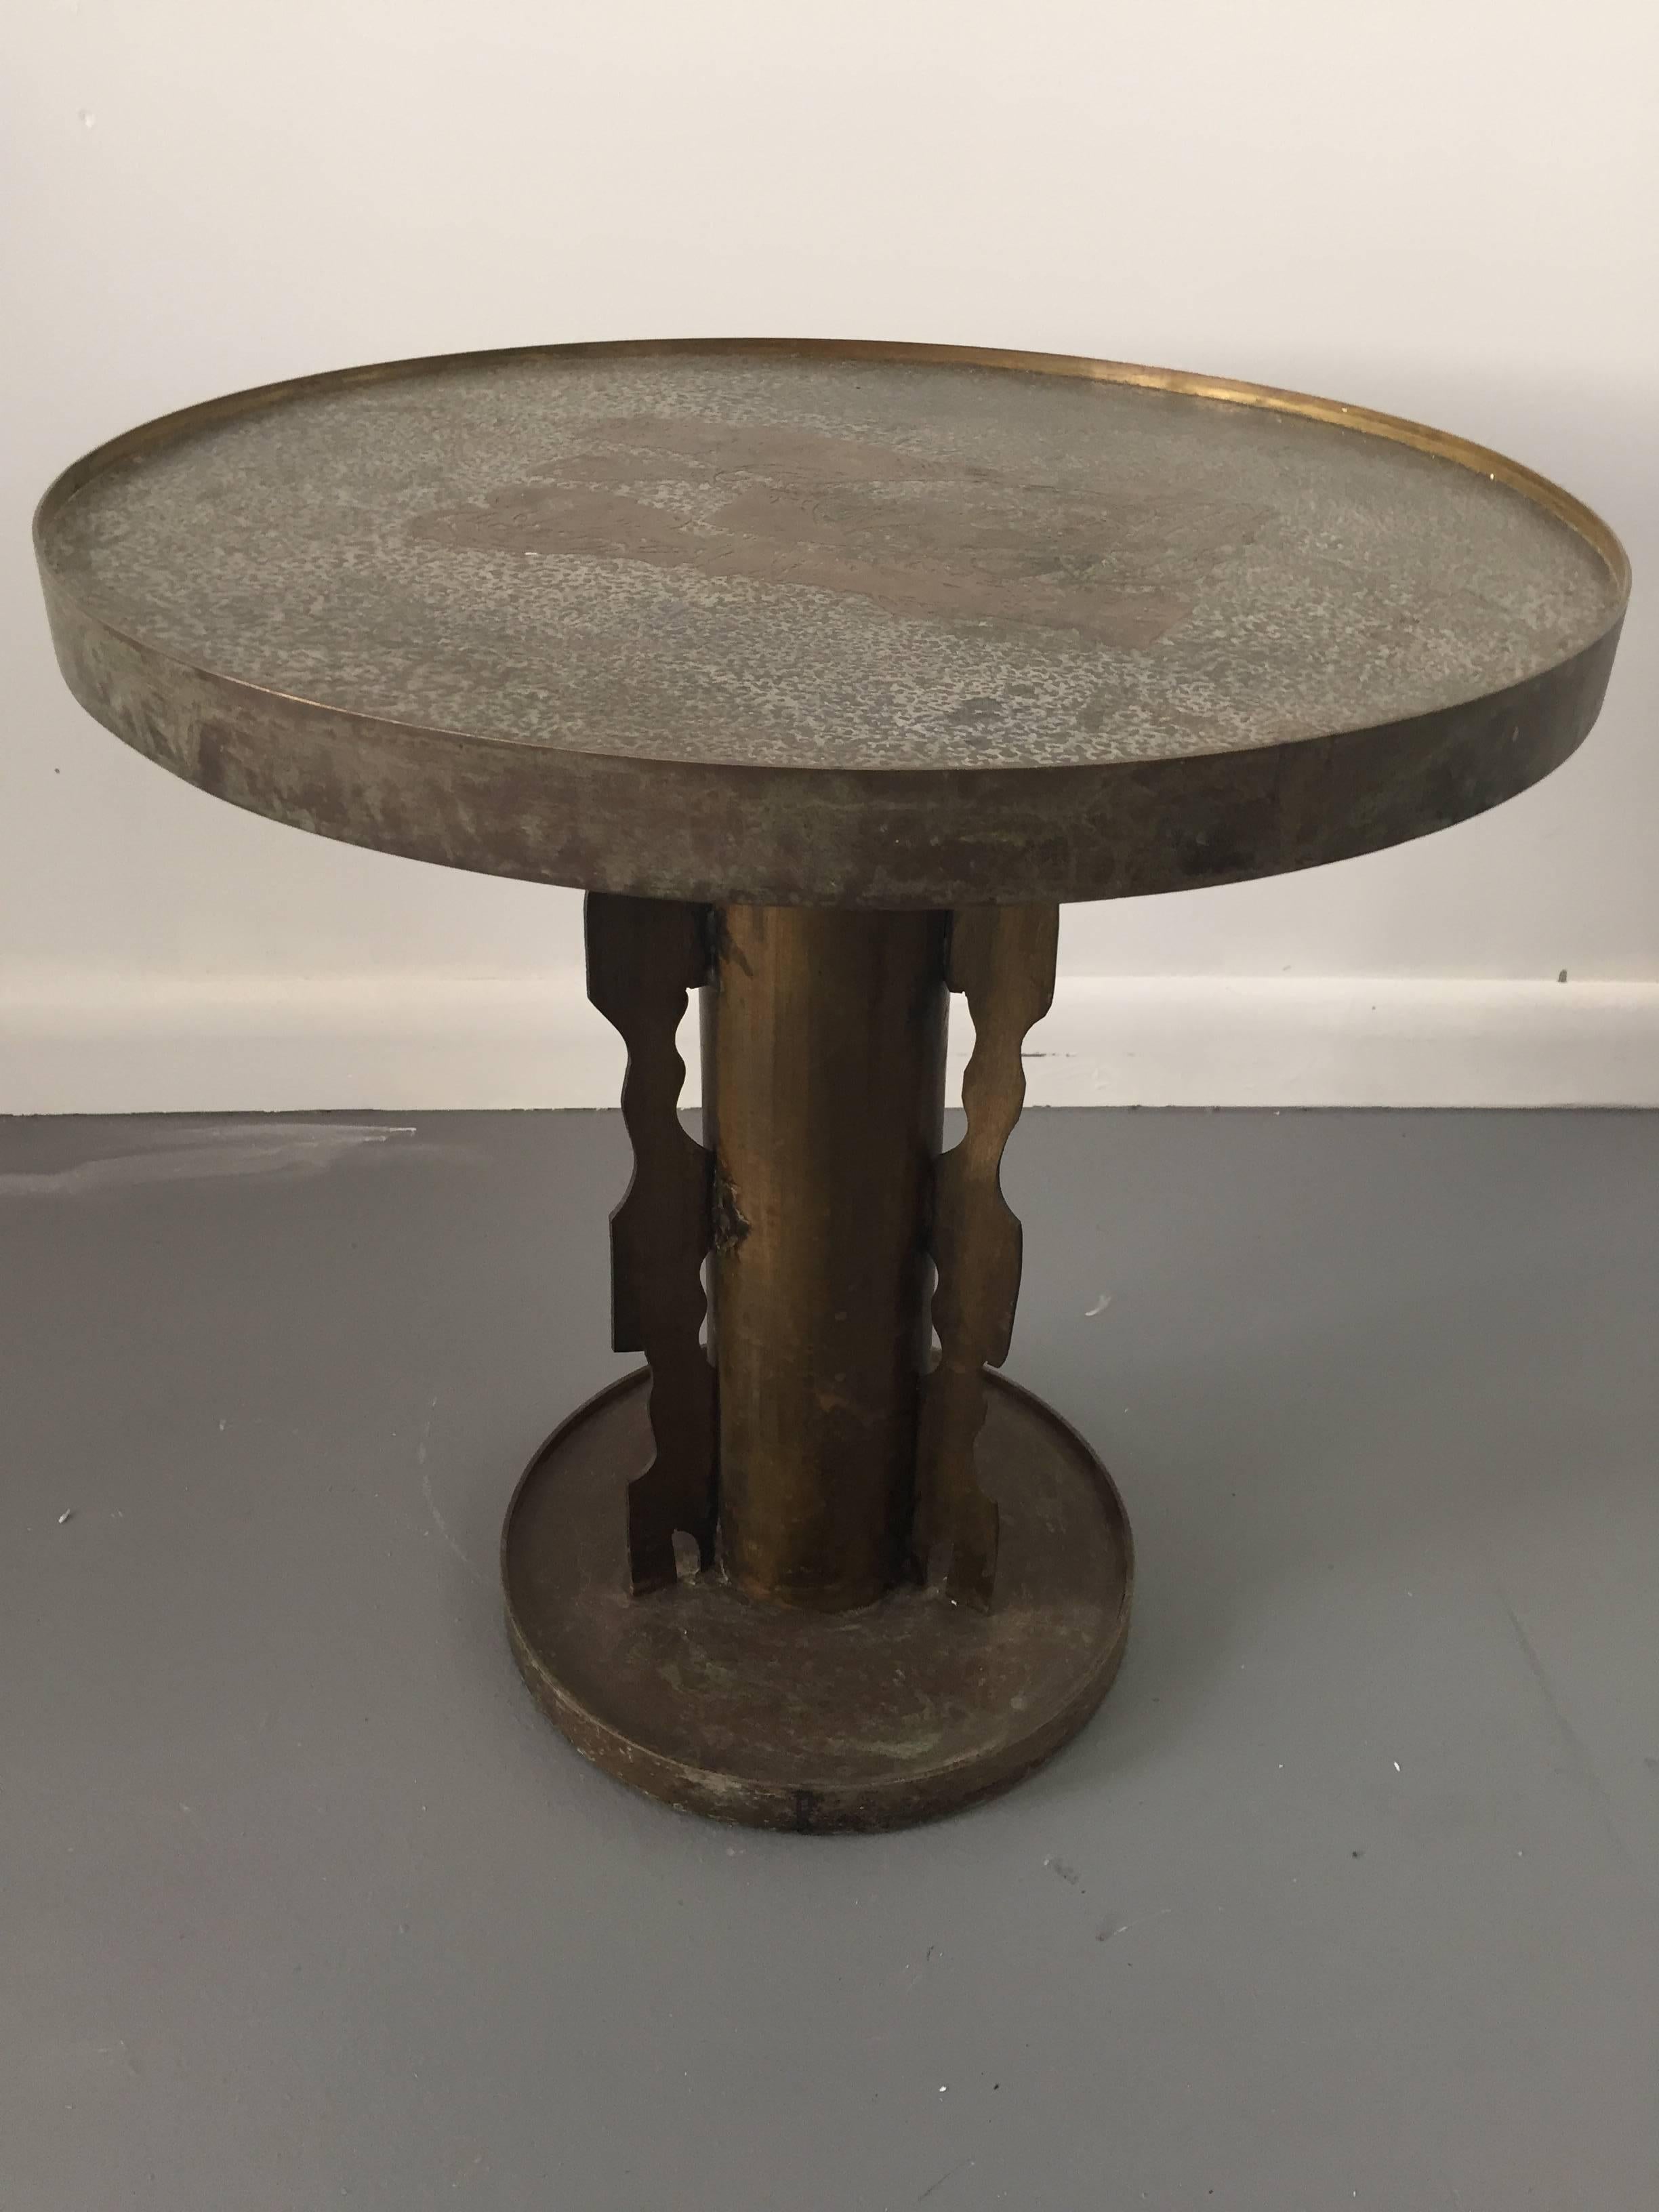 Acid-etched polychromed brass and pewter side table by Philip and Kelvin LaVerne with an Etruscan motif.

This father and son team worked in that extraordinary period with Harvey Probber, Vladimir Kagan, George Nelson, Harry Bertoia, and Paul Mccobb.